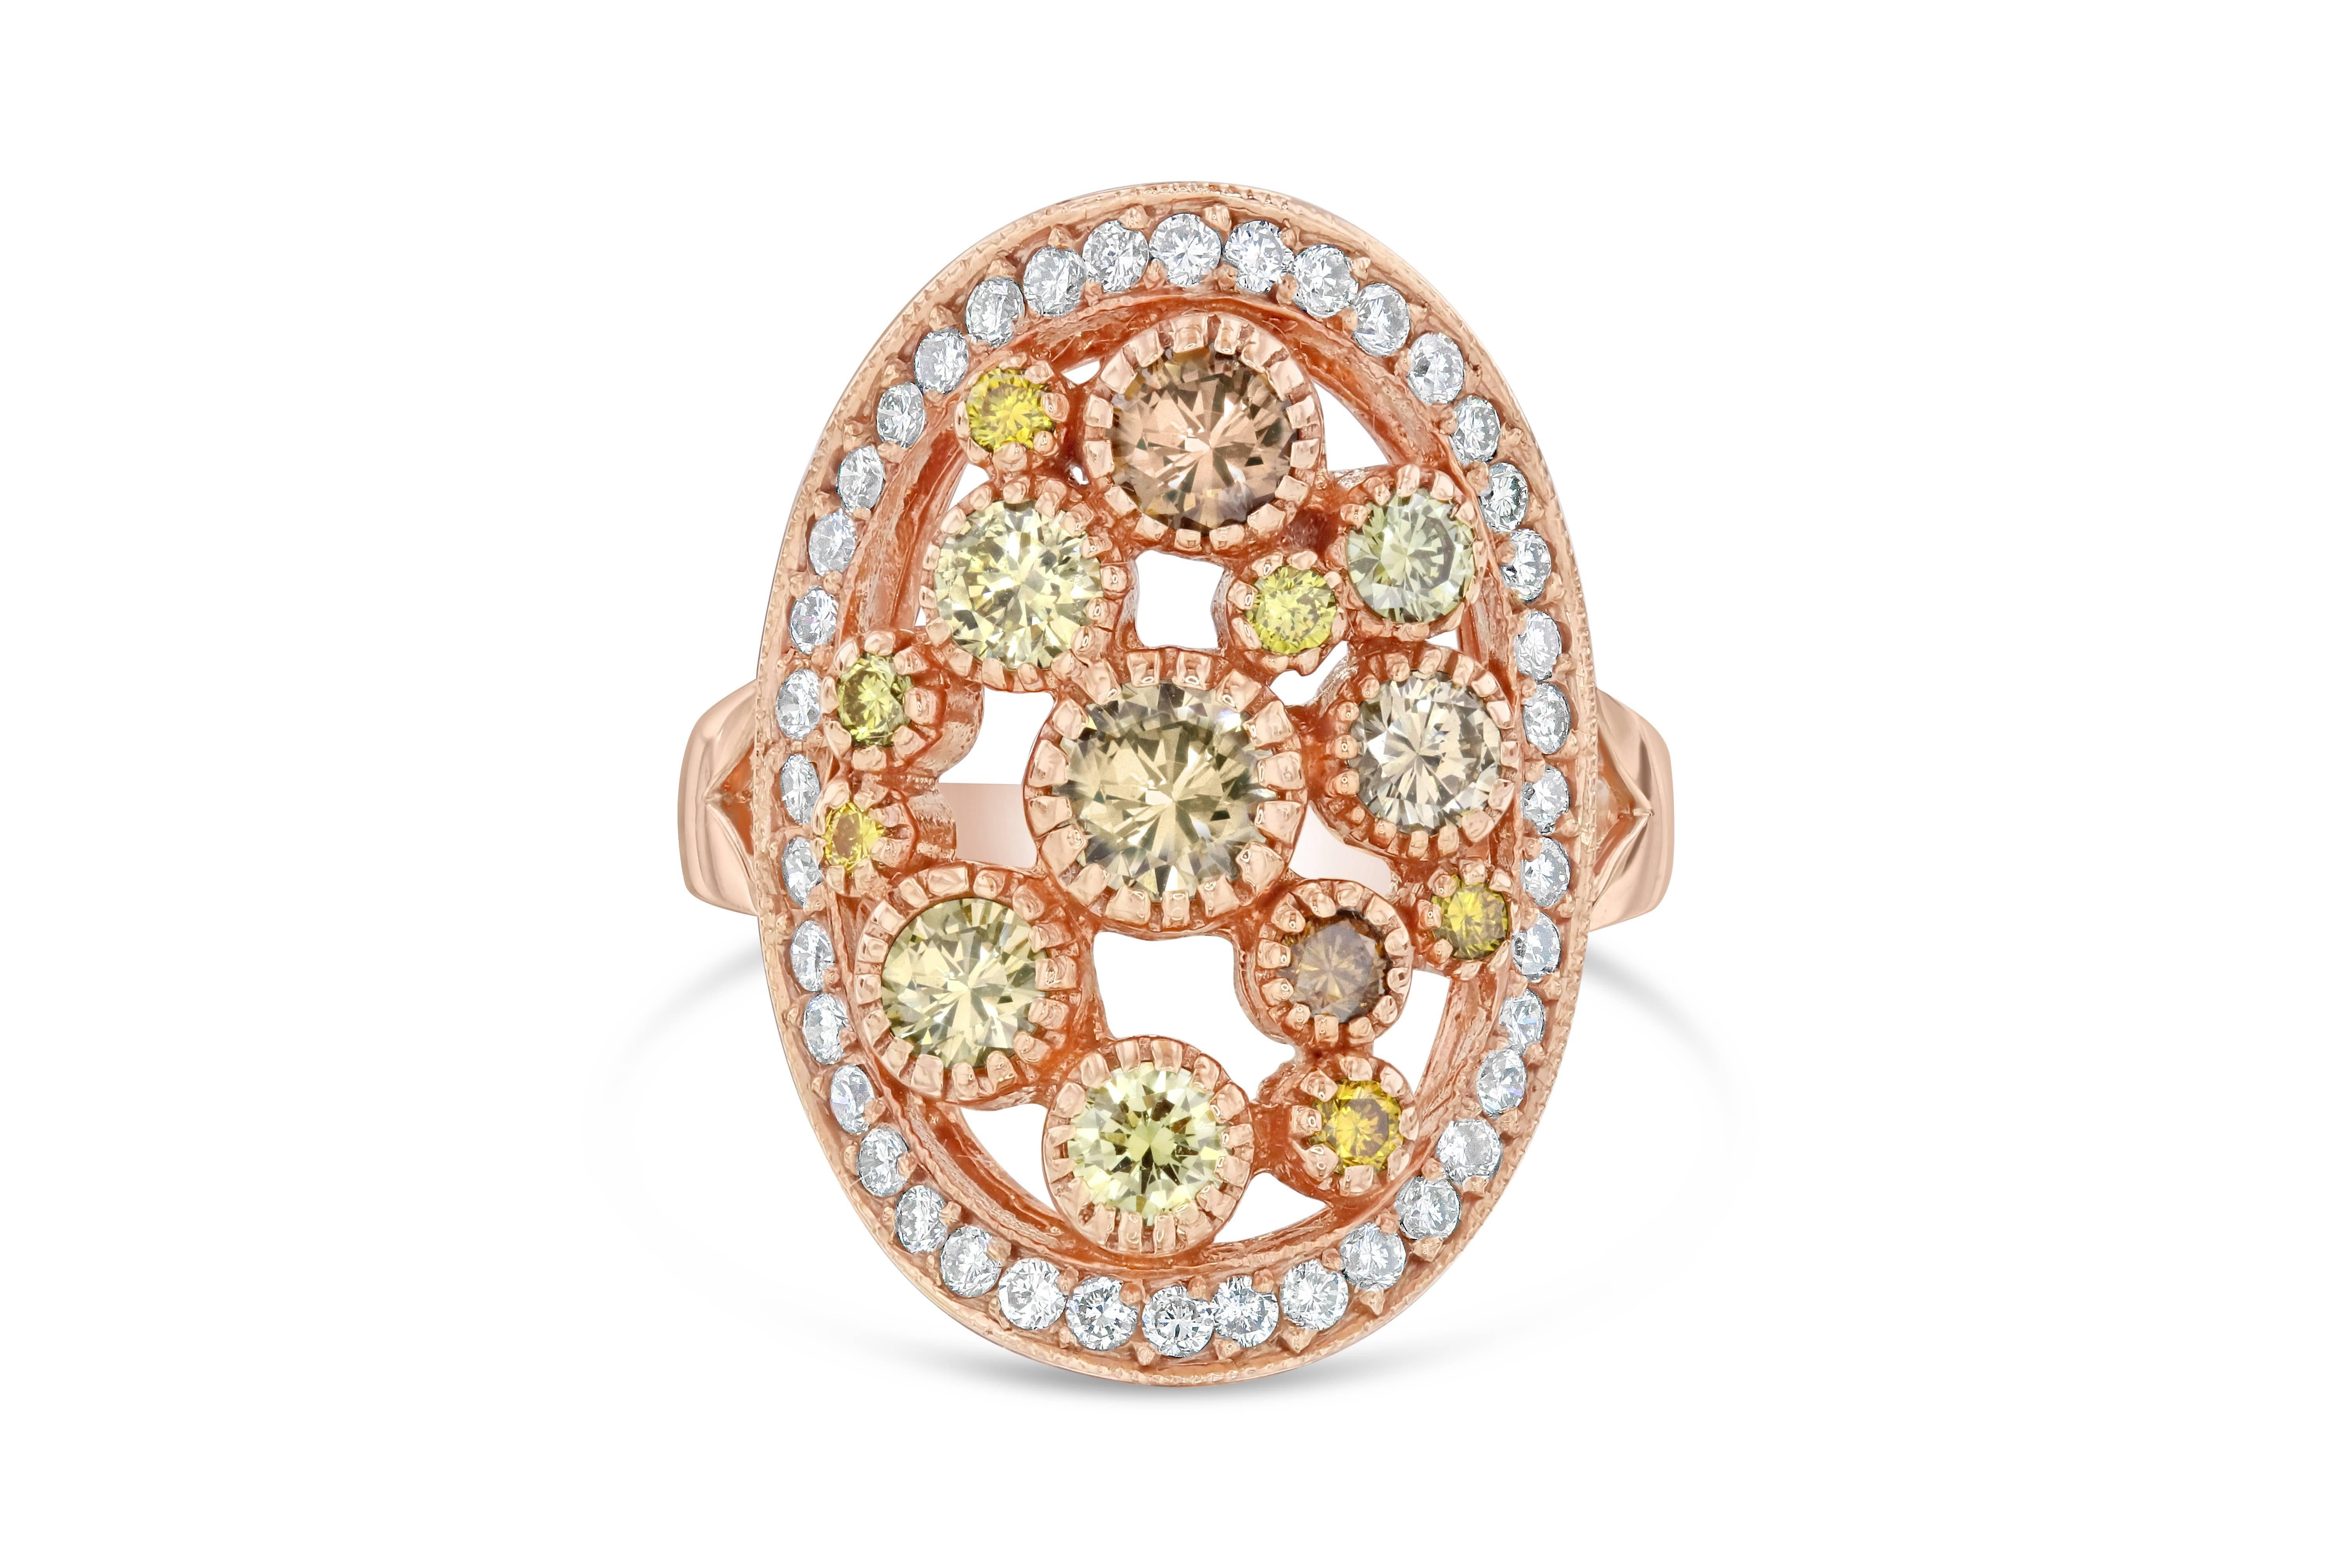 We like to call this ring a bubble gum cocktail ring!  There are 14 Round Cut Fancy Colored Diamonds that weigh 1.39 carats floating around the center of the ring.  The colors and sizes of the diamonds vary from dark brown to light yellow and some